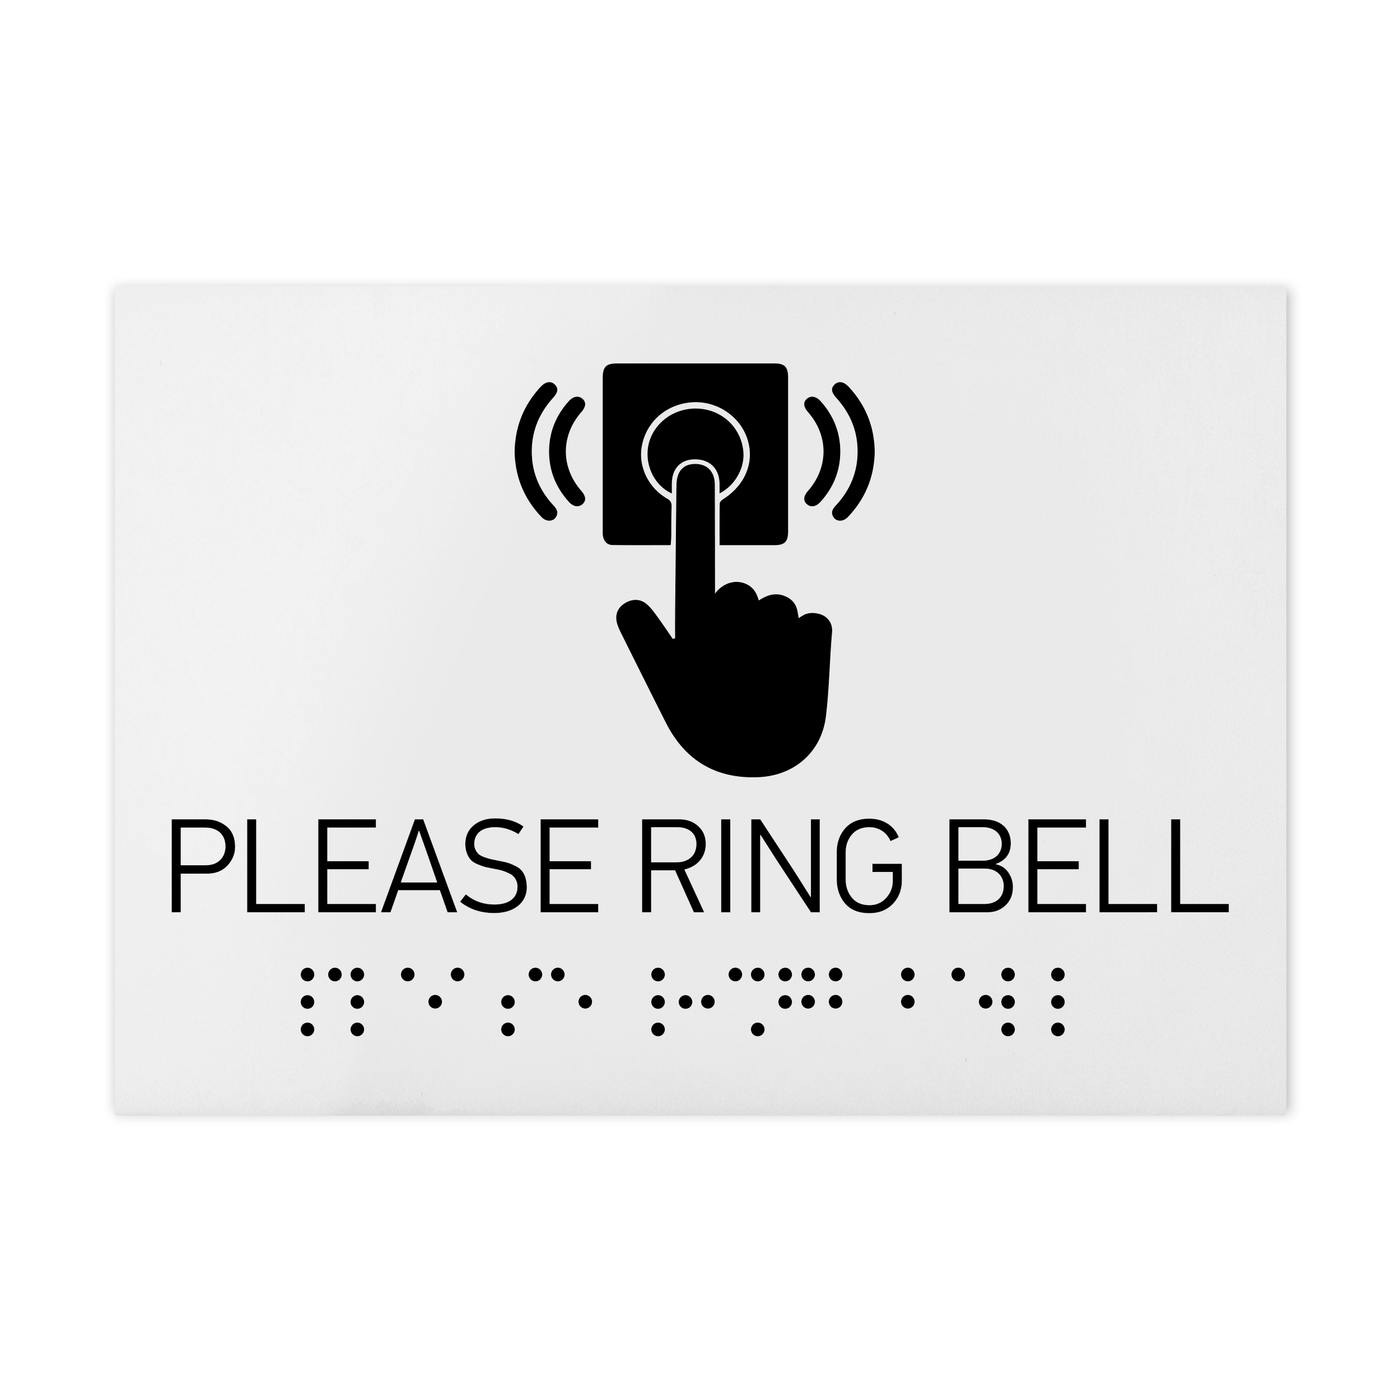 Information Signs - Please Ring Bell Sign Braille - White Acrylic